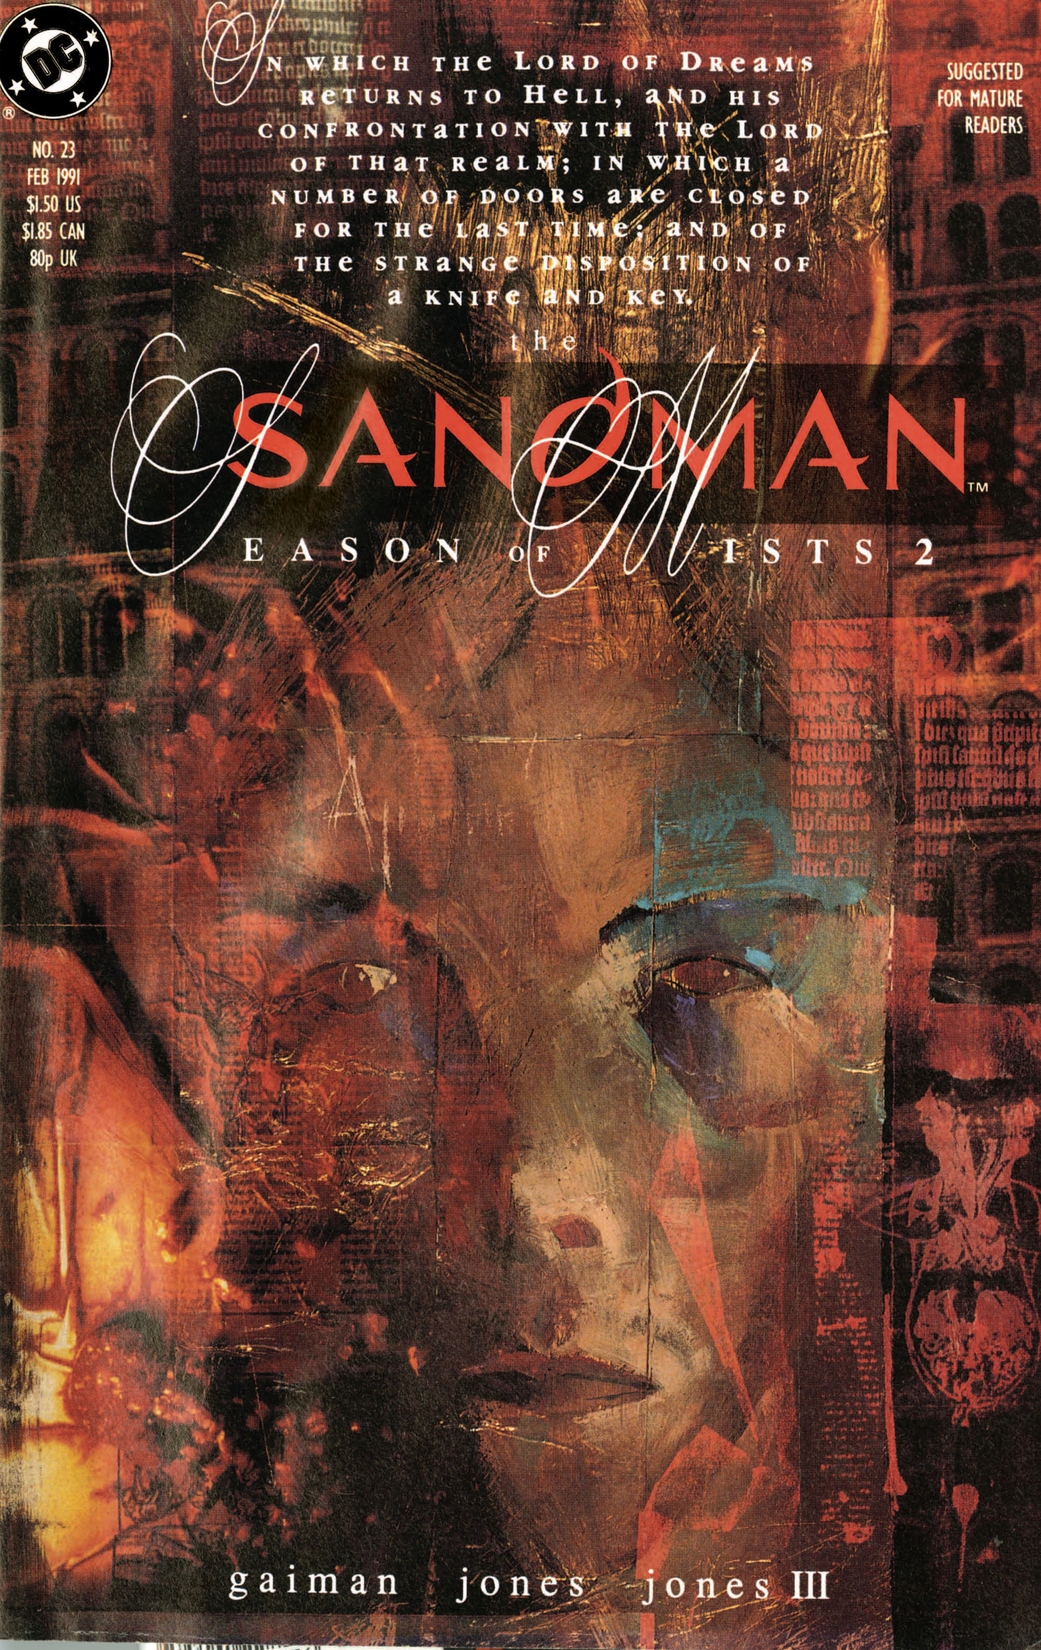 The Sandman #23 preview images